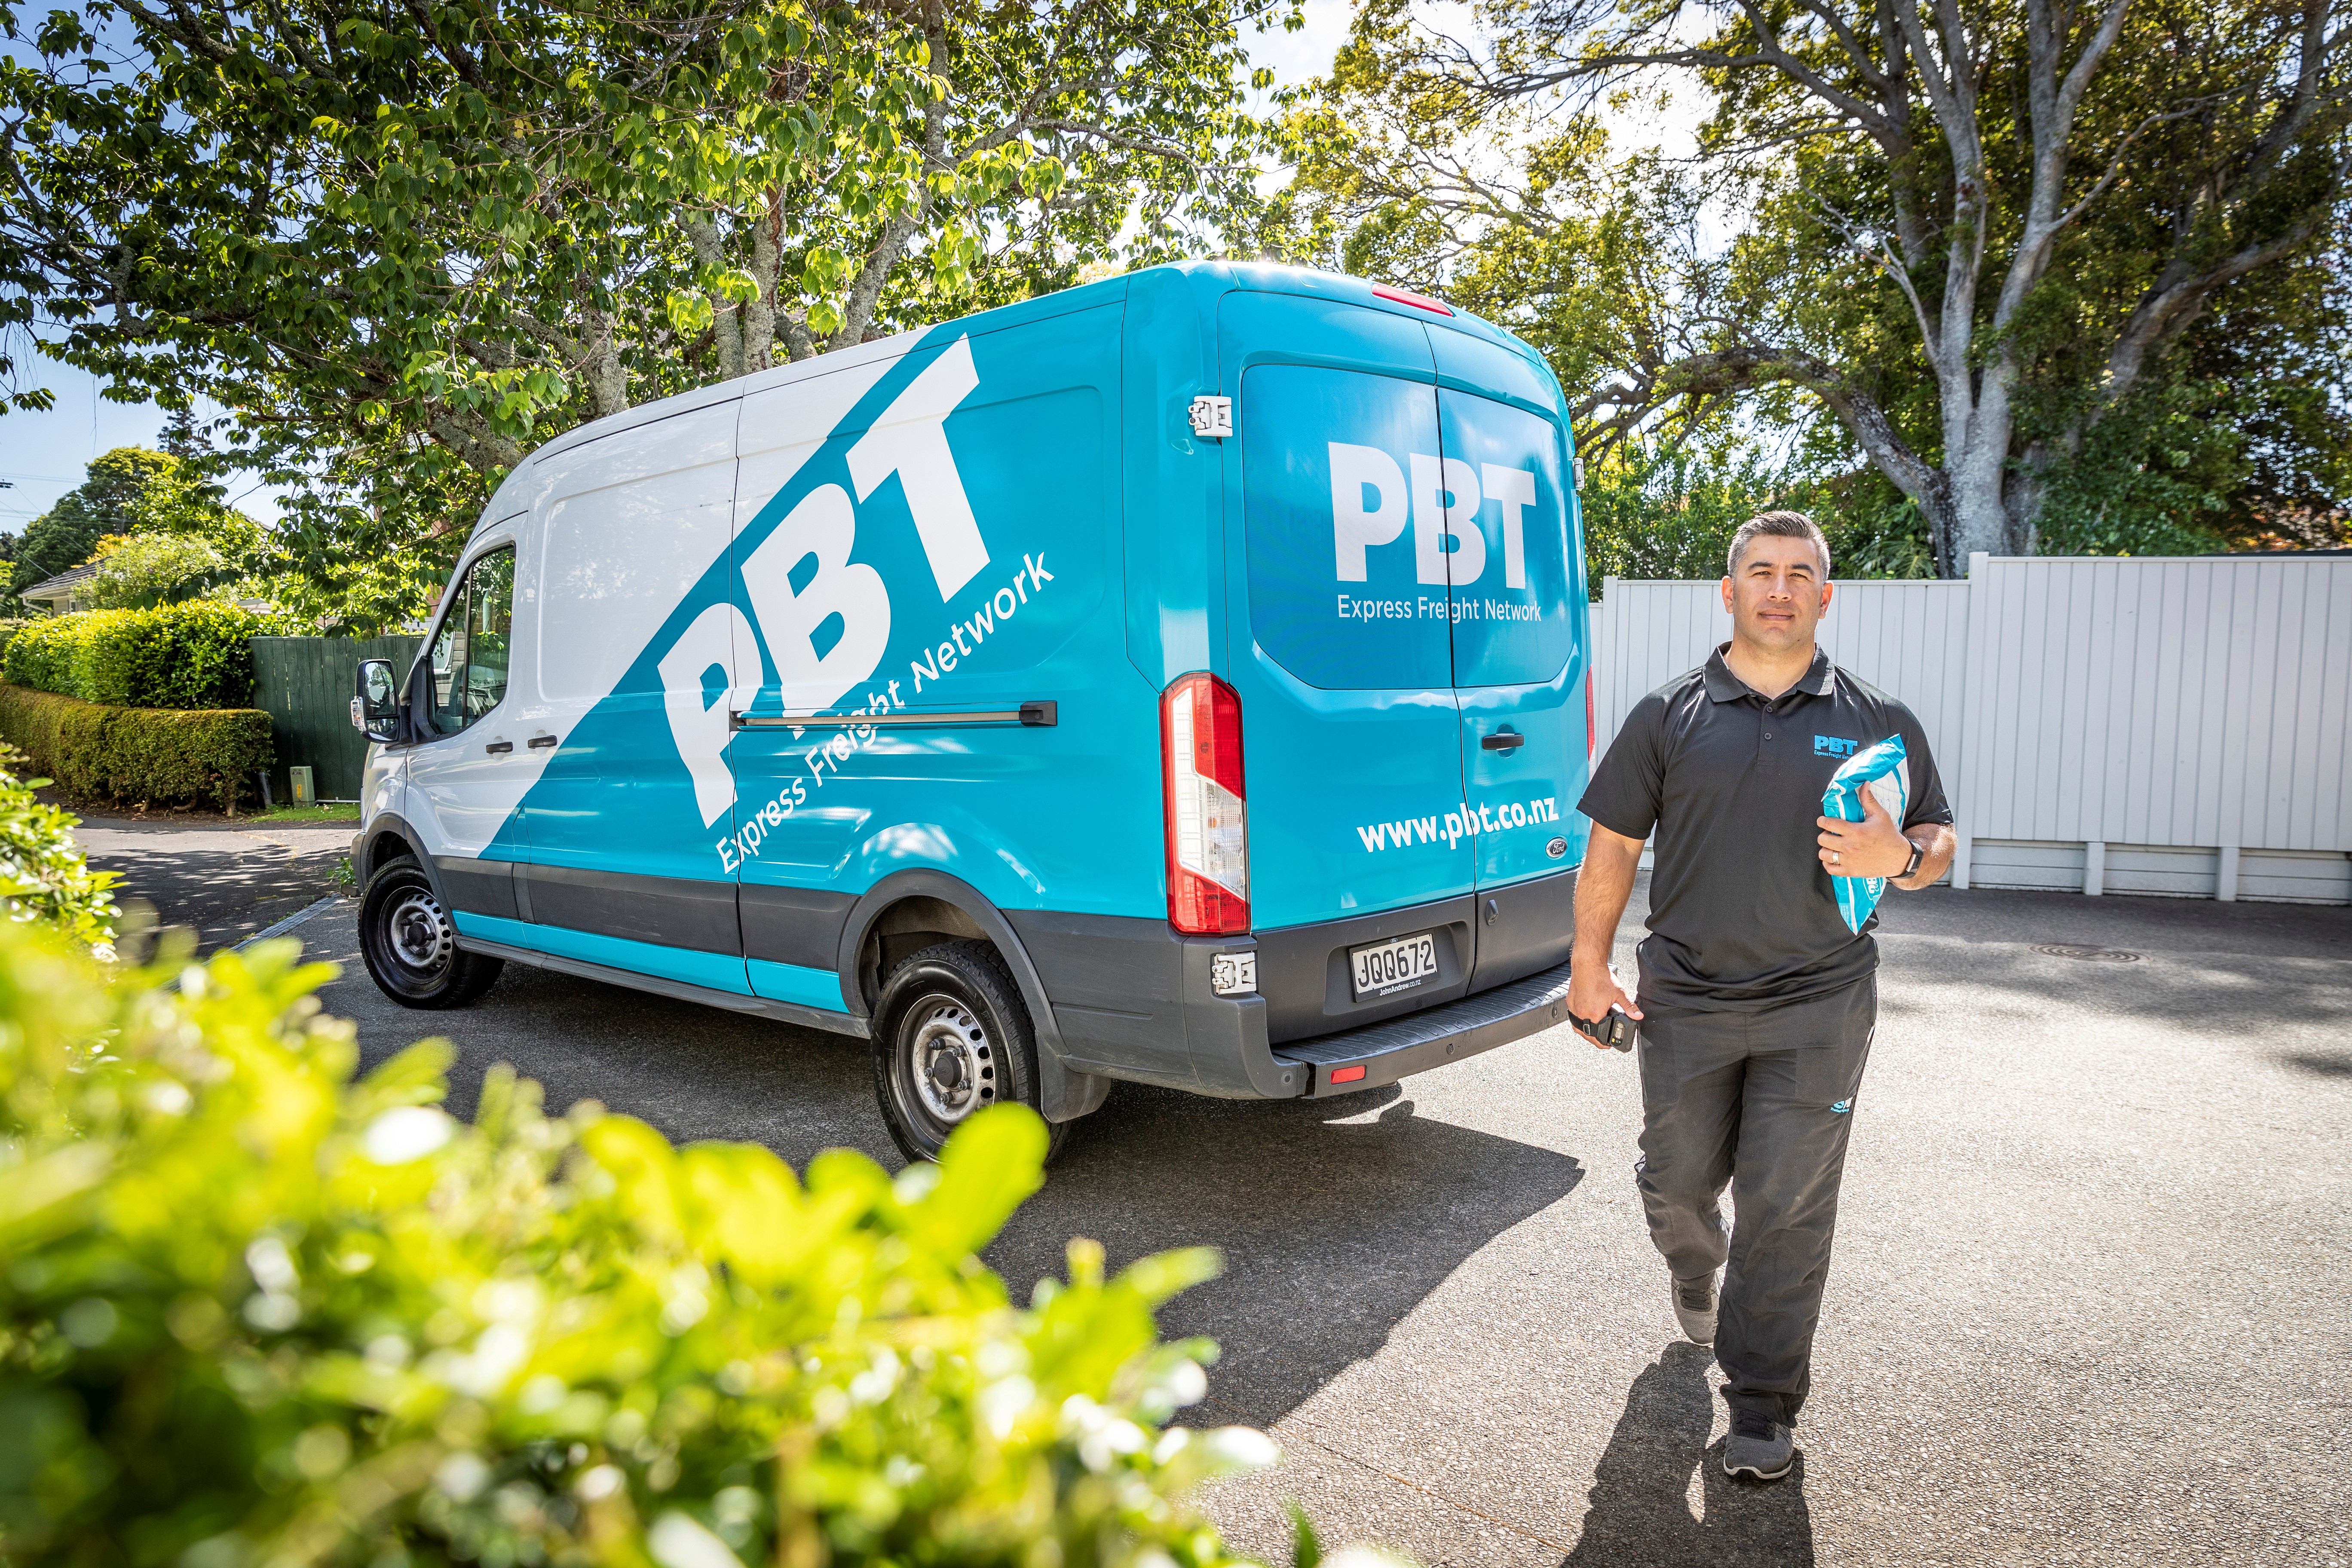 PBT continues its sustainability journey to deliver a better future